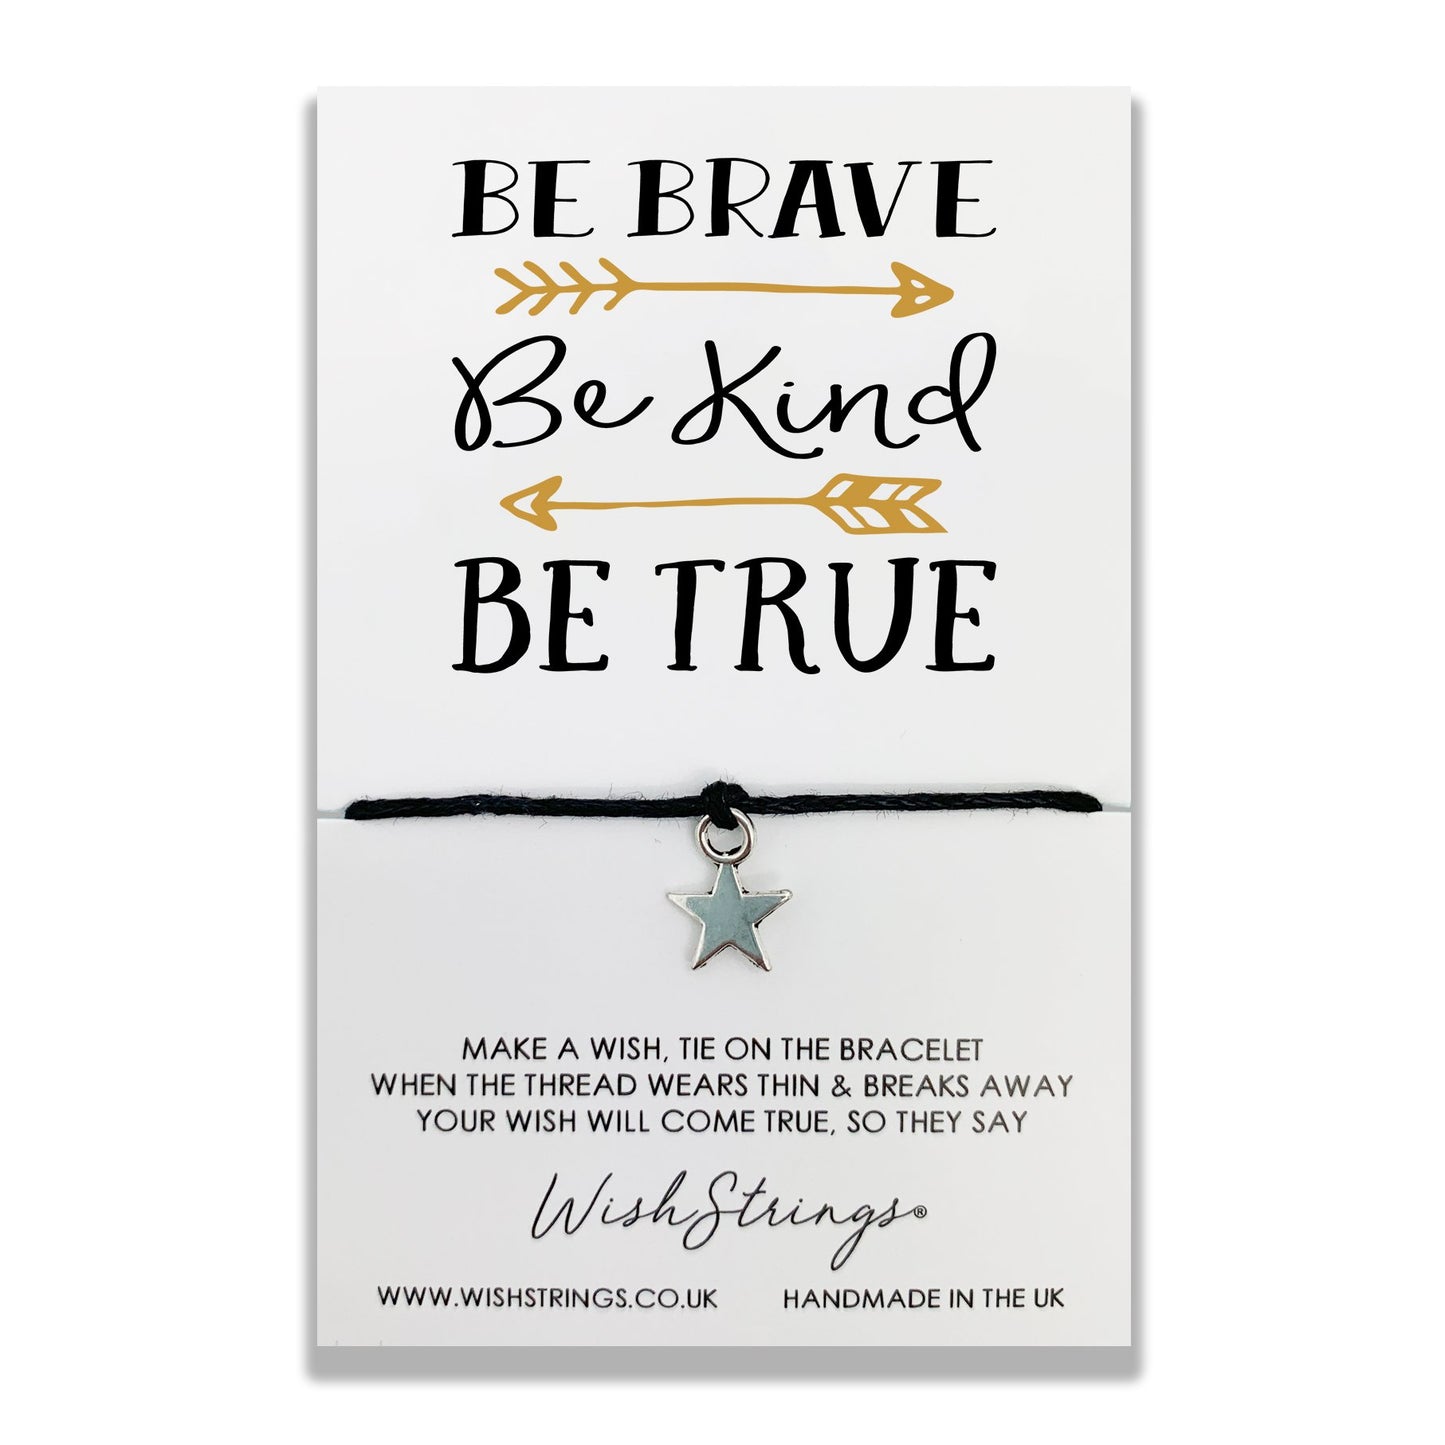 Be Brave Be Kind Be True Wish String Bracelet With Lucky Charm